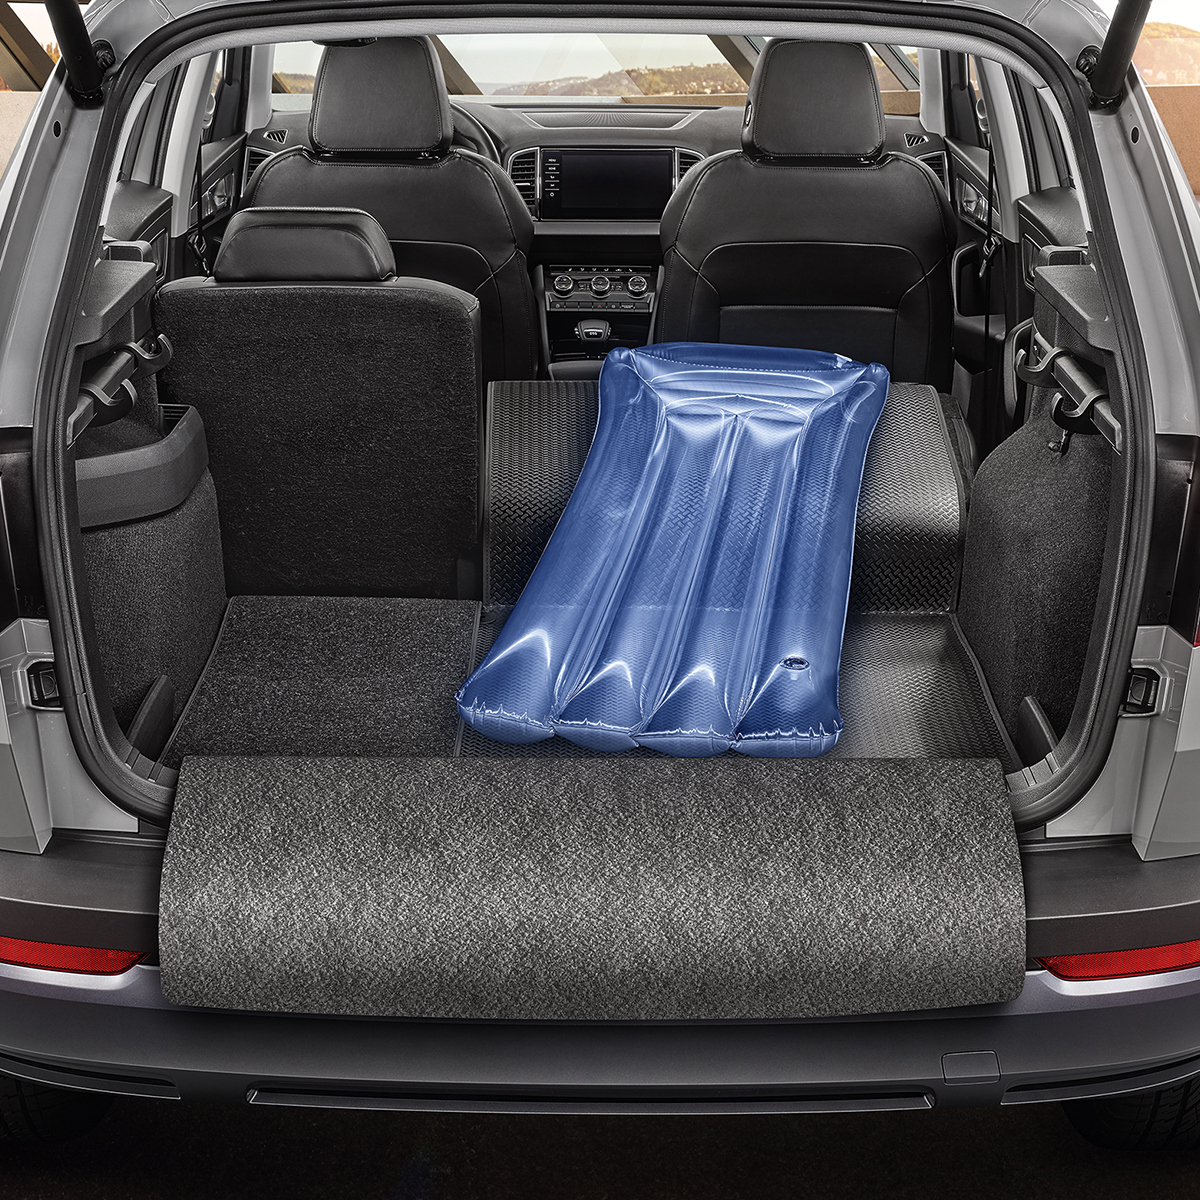 SKODA Karoq 2017-Present Boot Liner Foldable With Bumper Cover